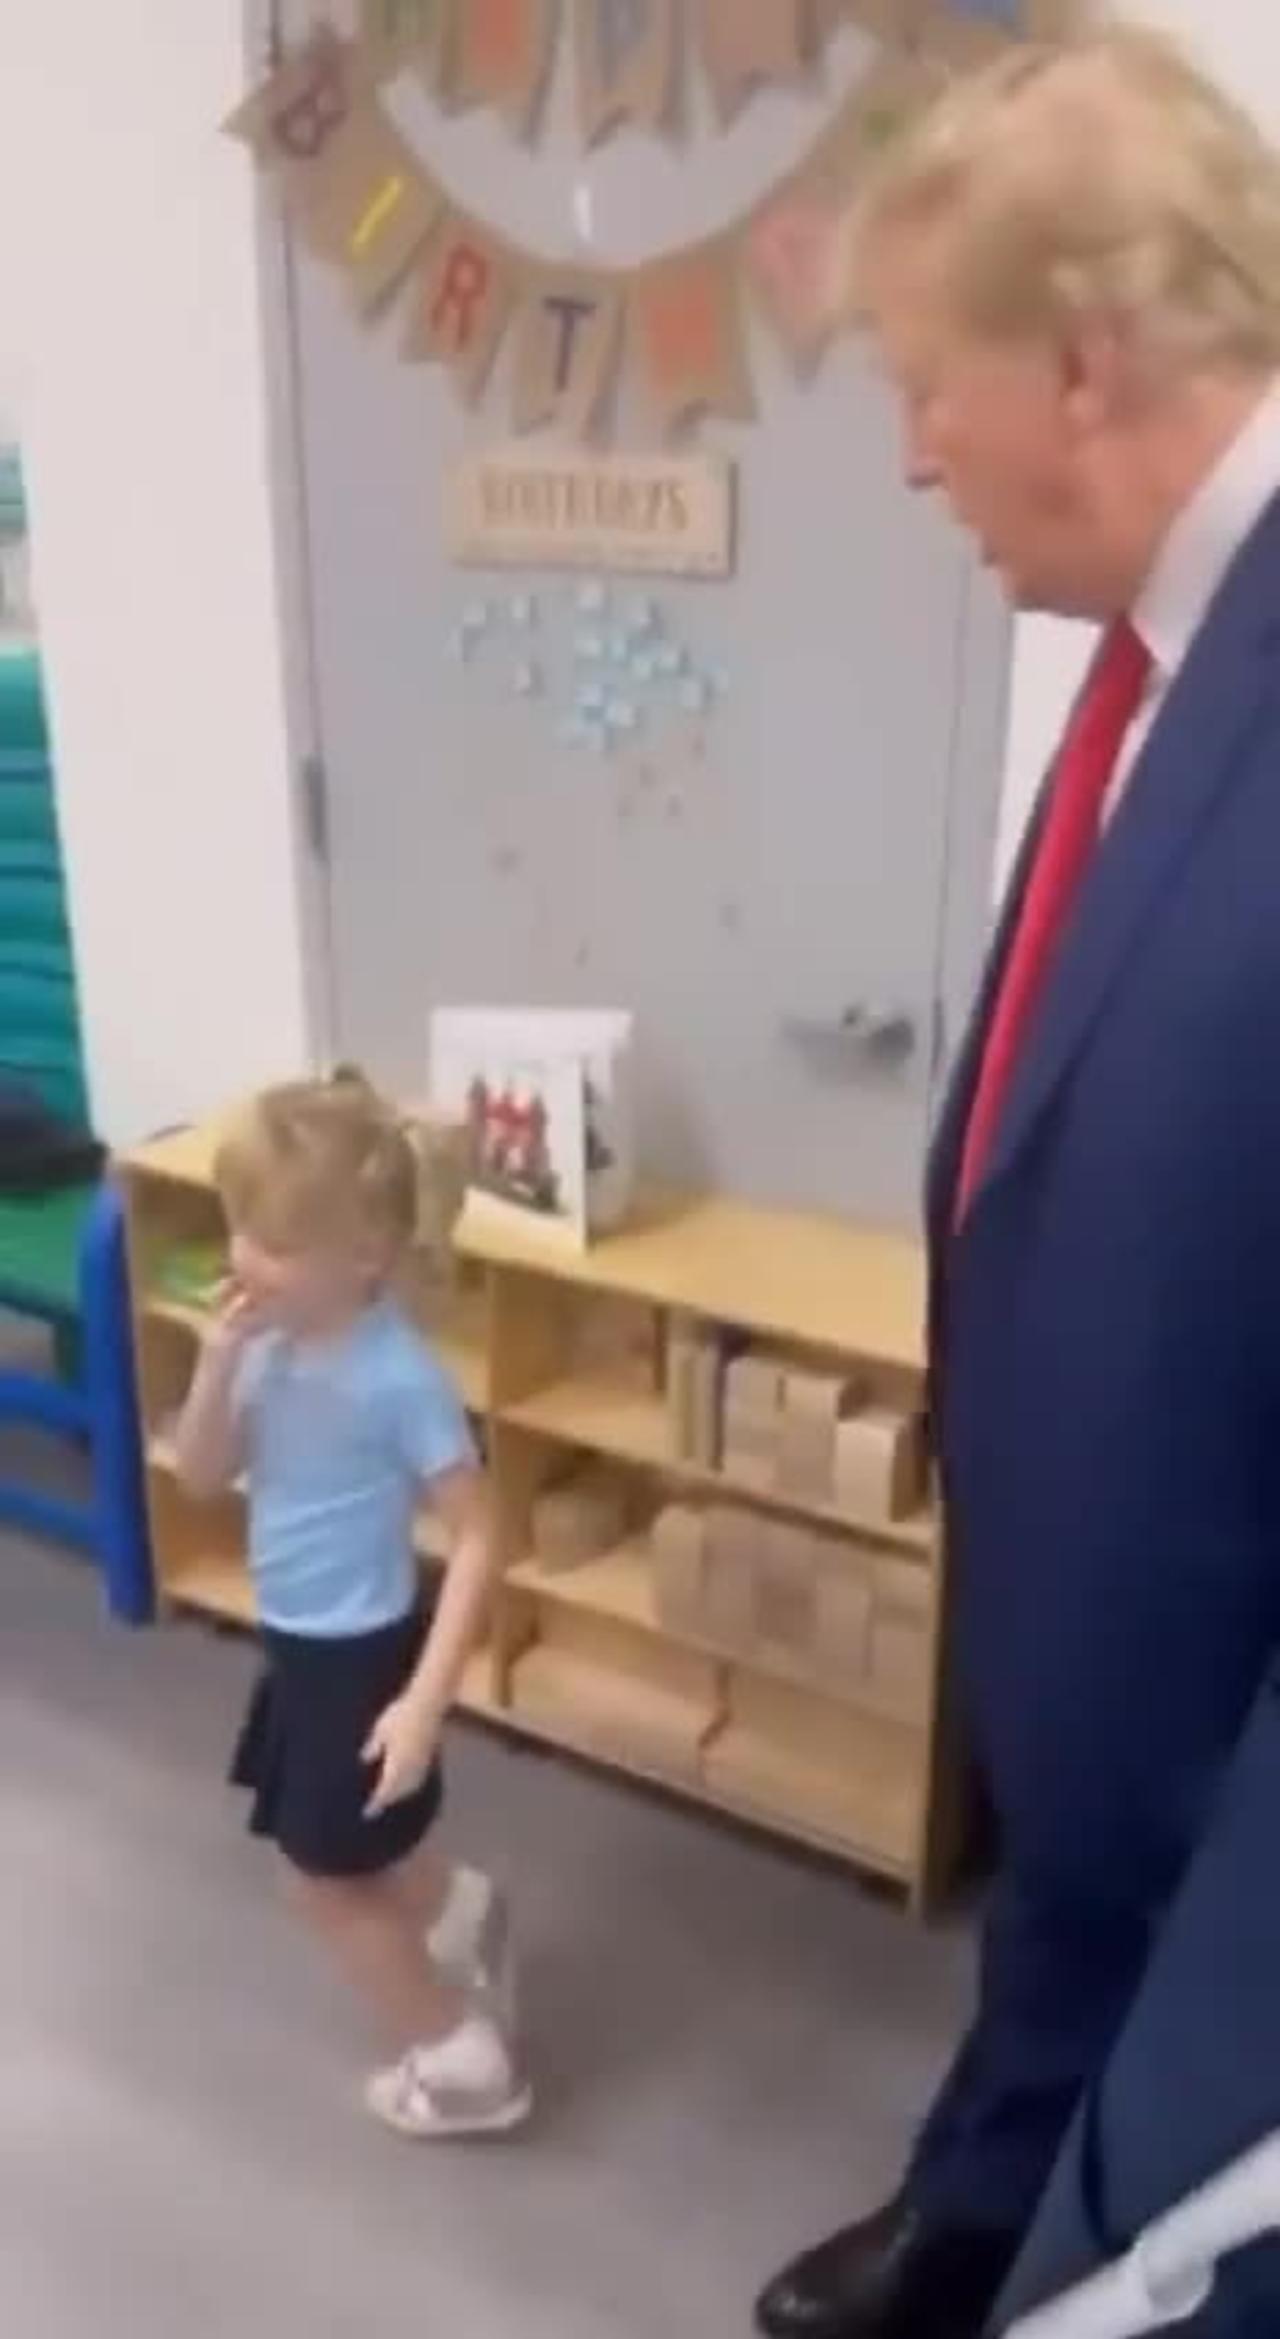 Trump visits his GRANDDAUGHTER'S SCHOOL for Grandparents’ Day